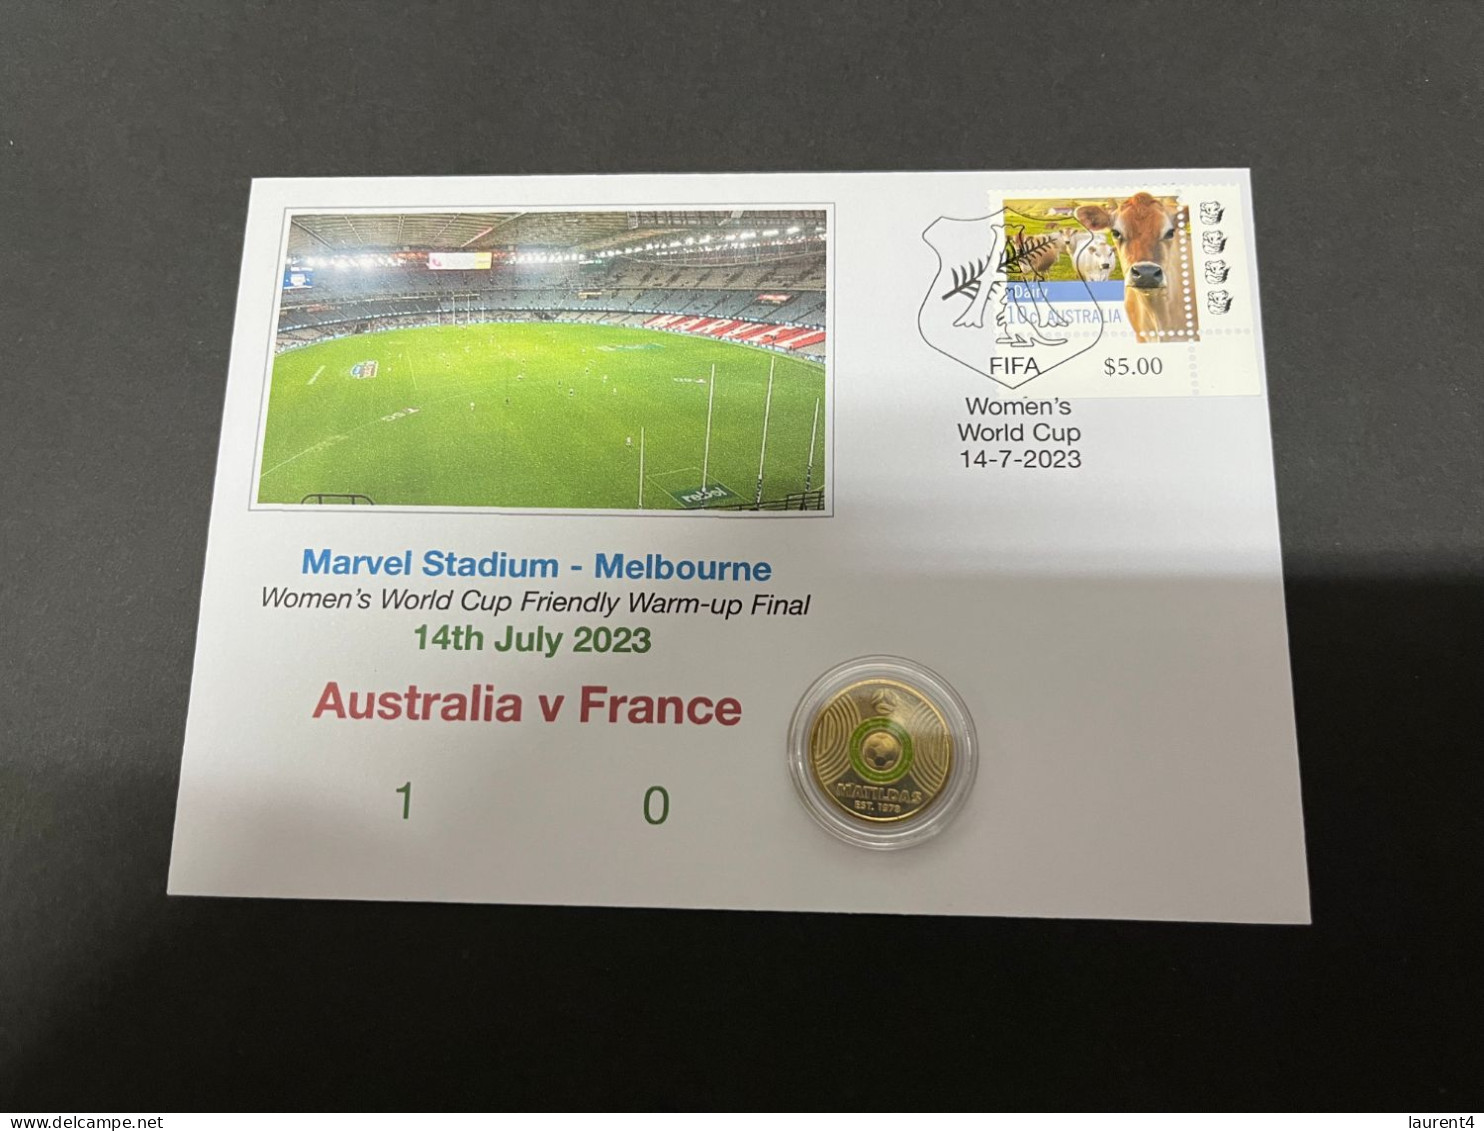 14-7-2023 (2 S 10 A) Women's Football World Cup ($2.00 Colored Coin) FIFA Friendly Final - Australia (1) France (0) - 2 Dollars